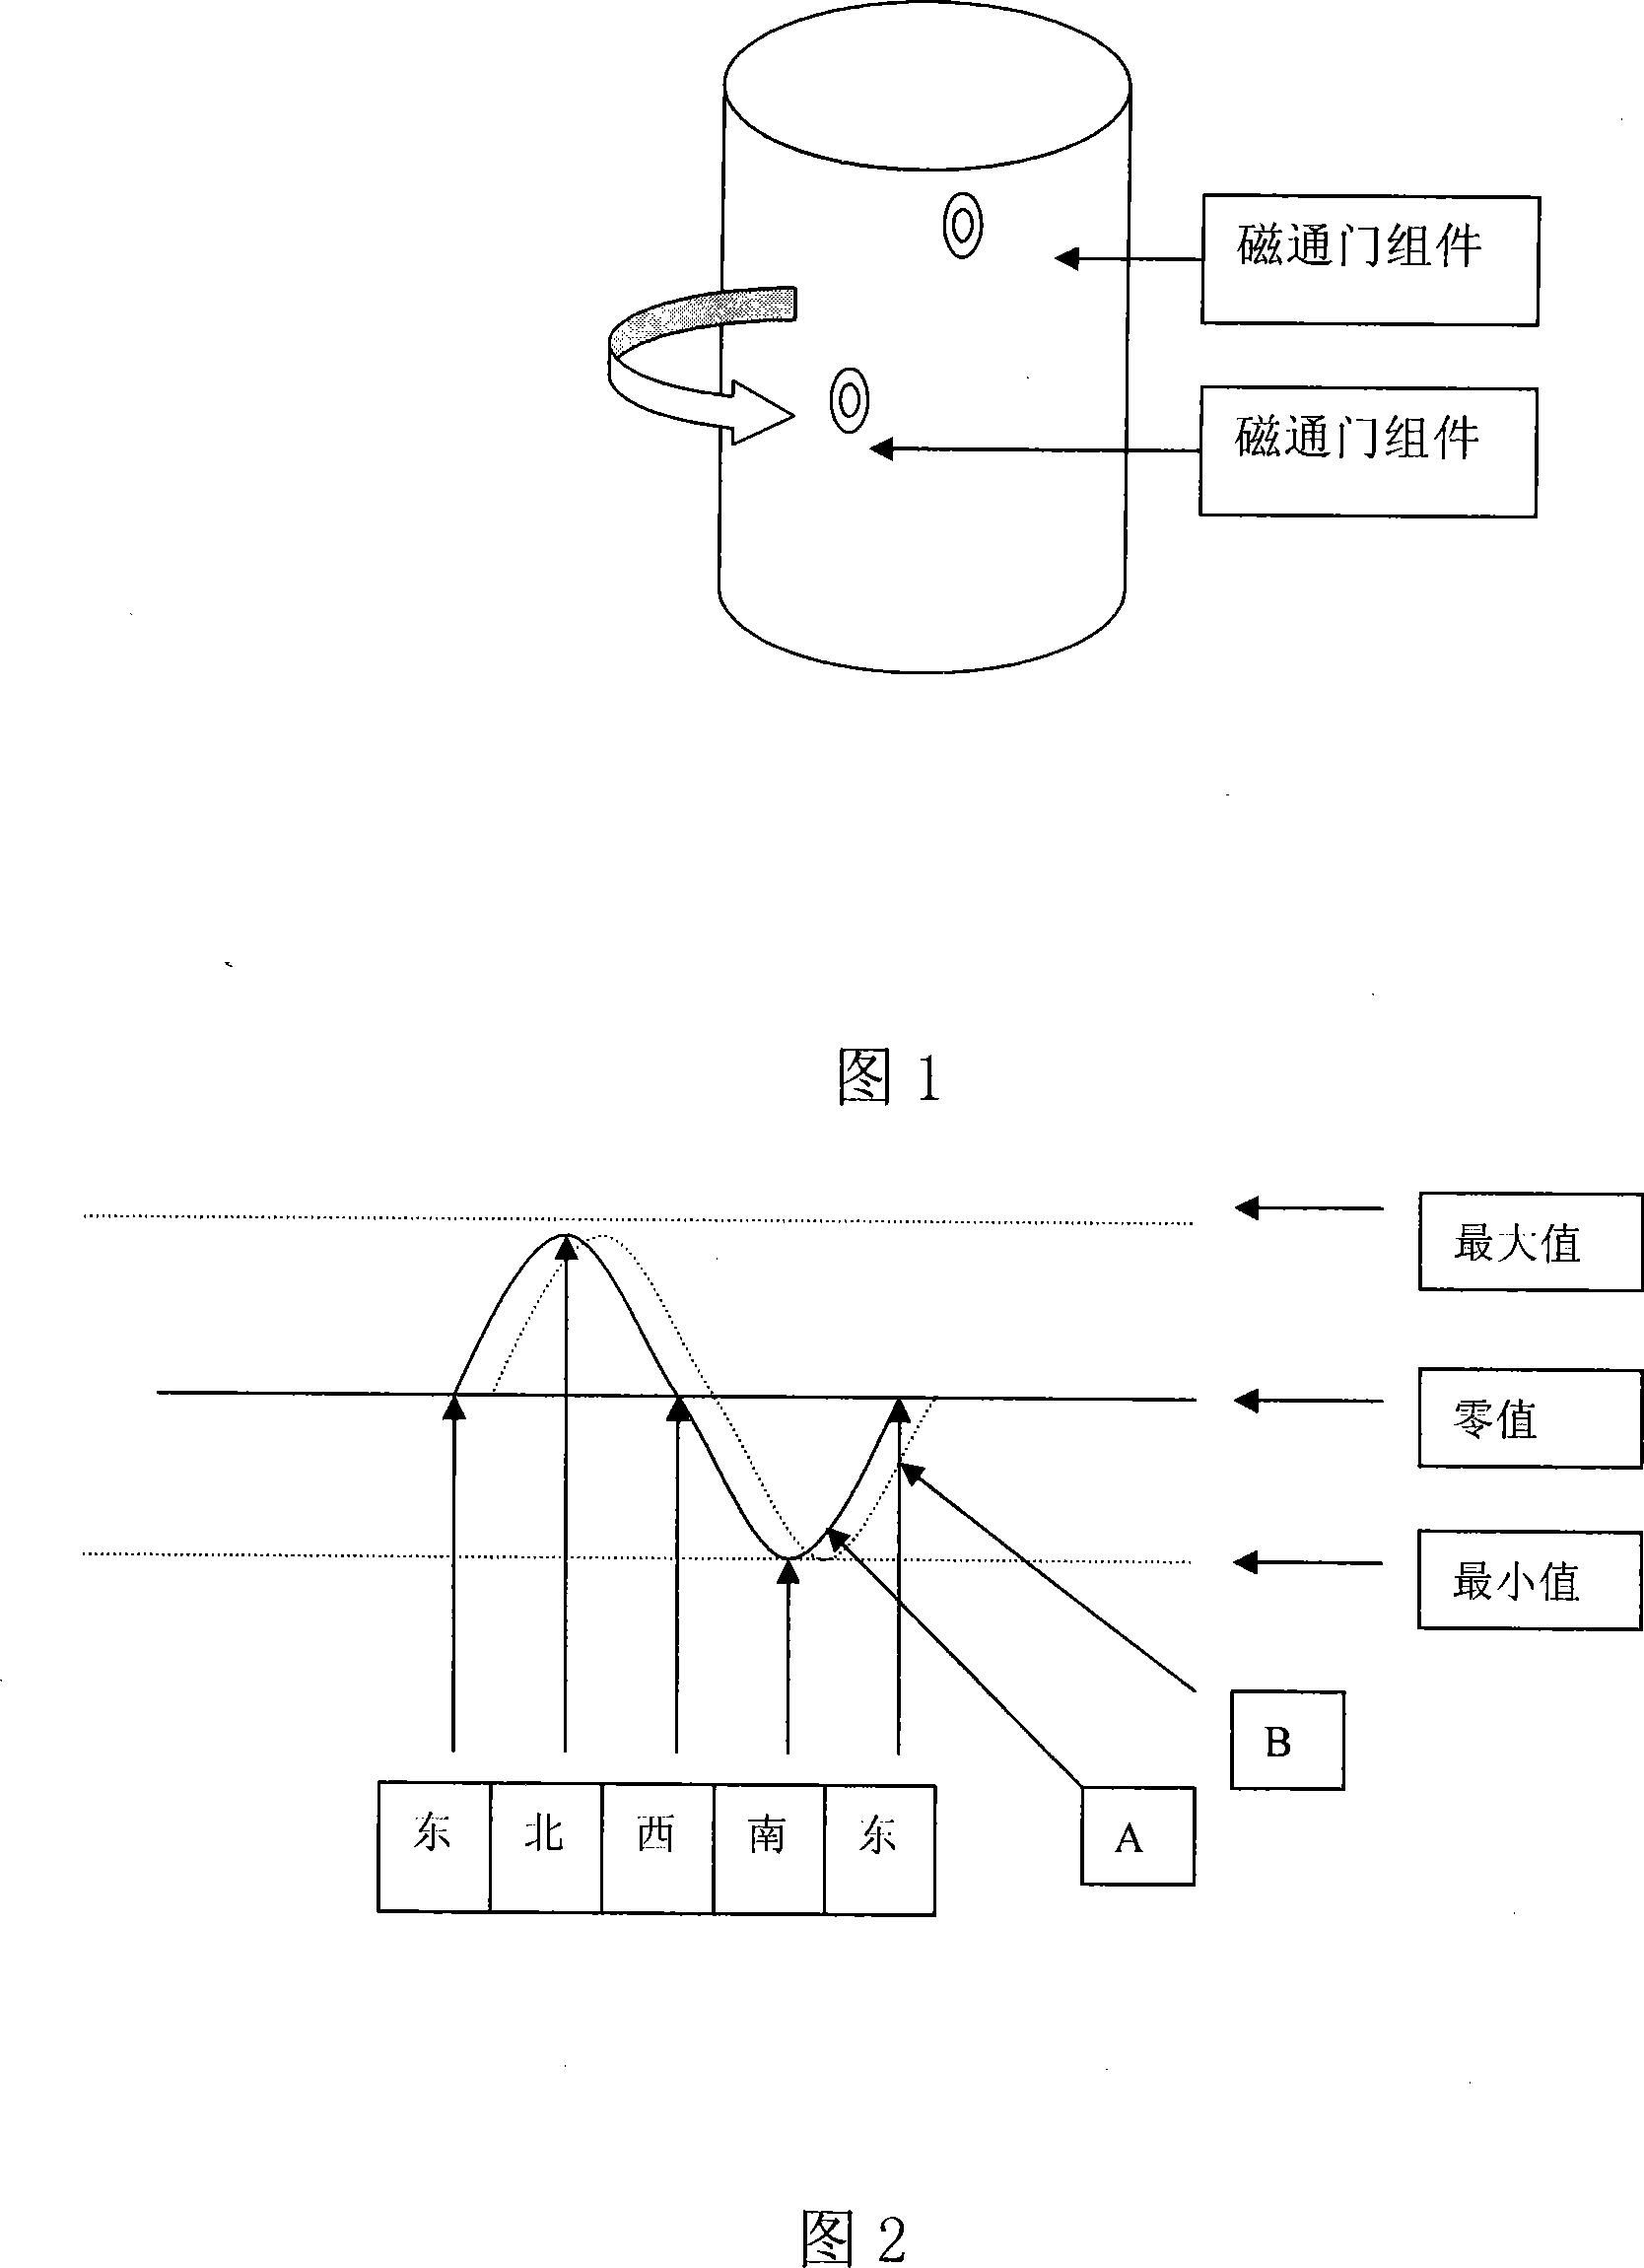 Measurement method of down-hole boring tool (drill) rotative velocity and direction and short node